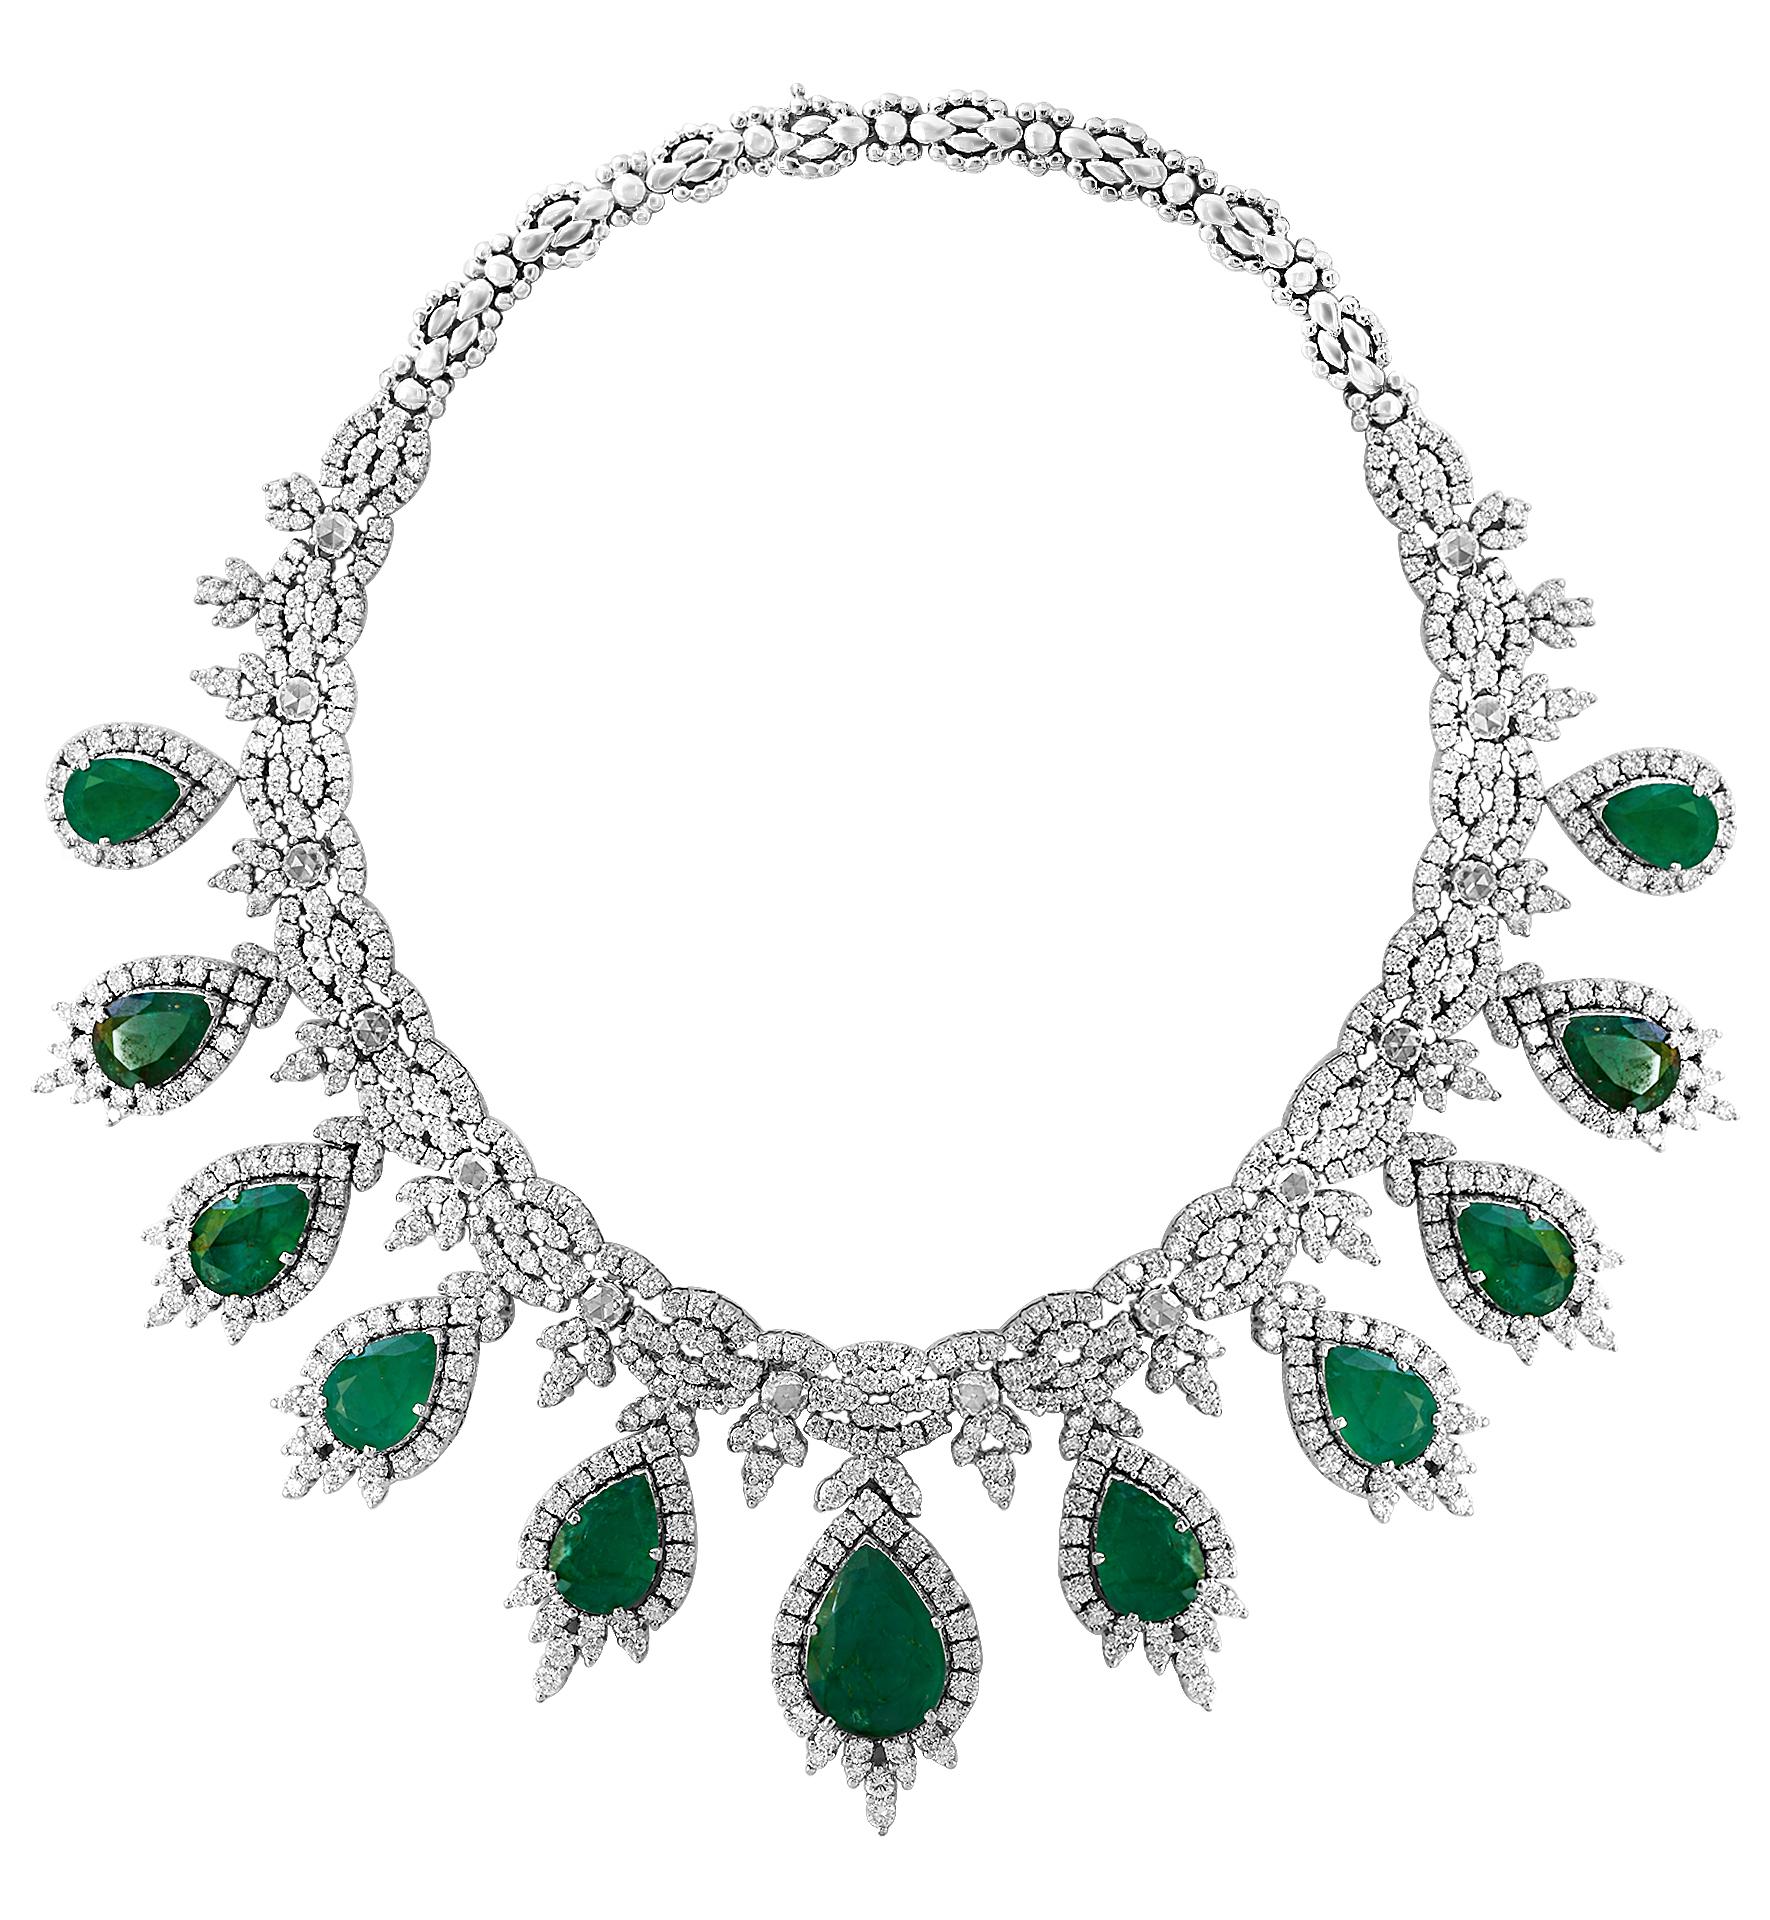 Pear Cut GIA Certified Pear Shape Emerald and Diamond Necklace and Earring Bridal Suite